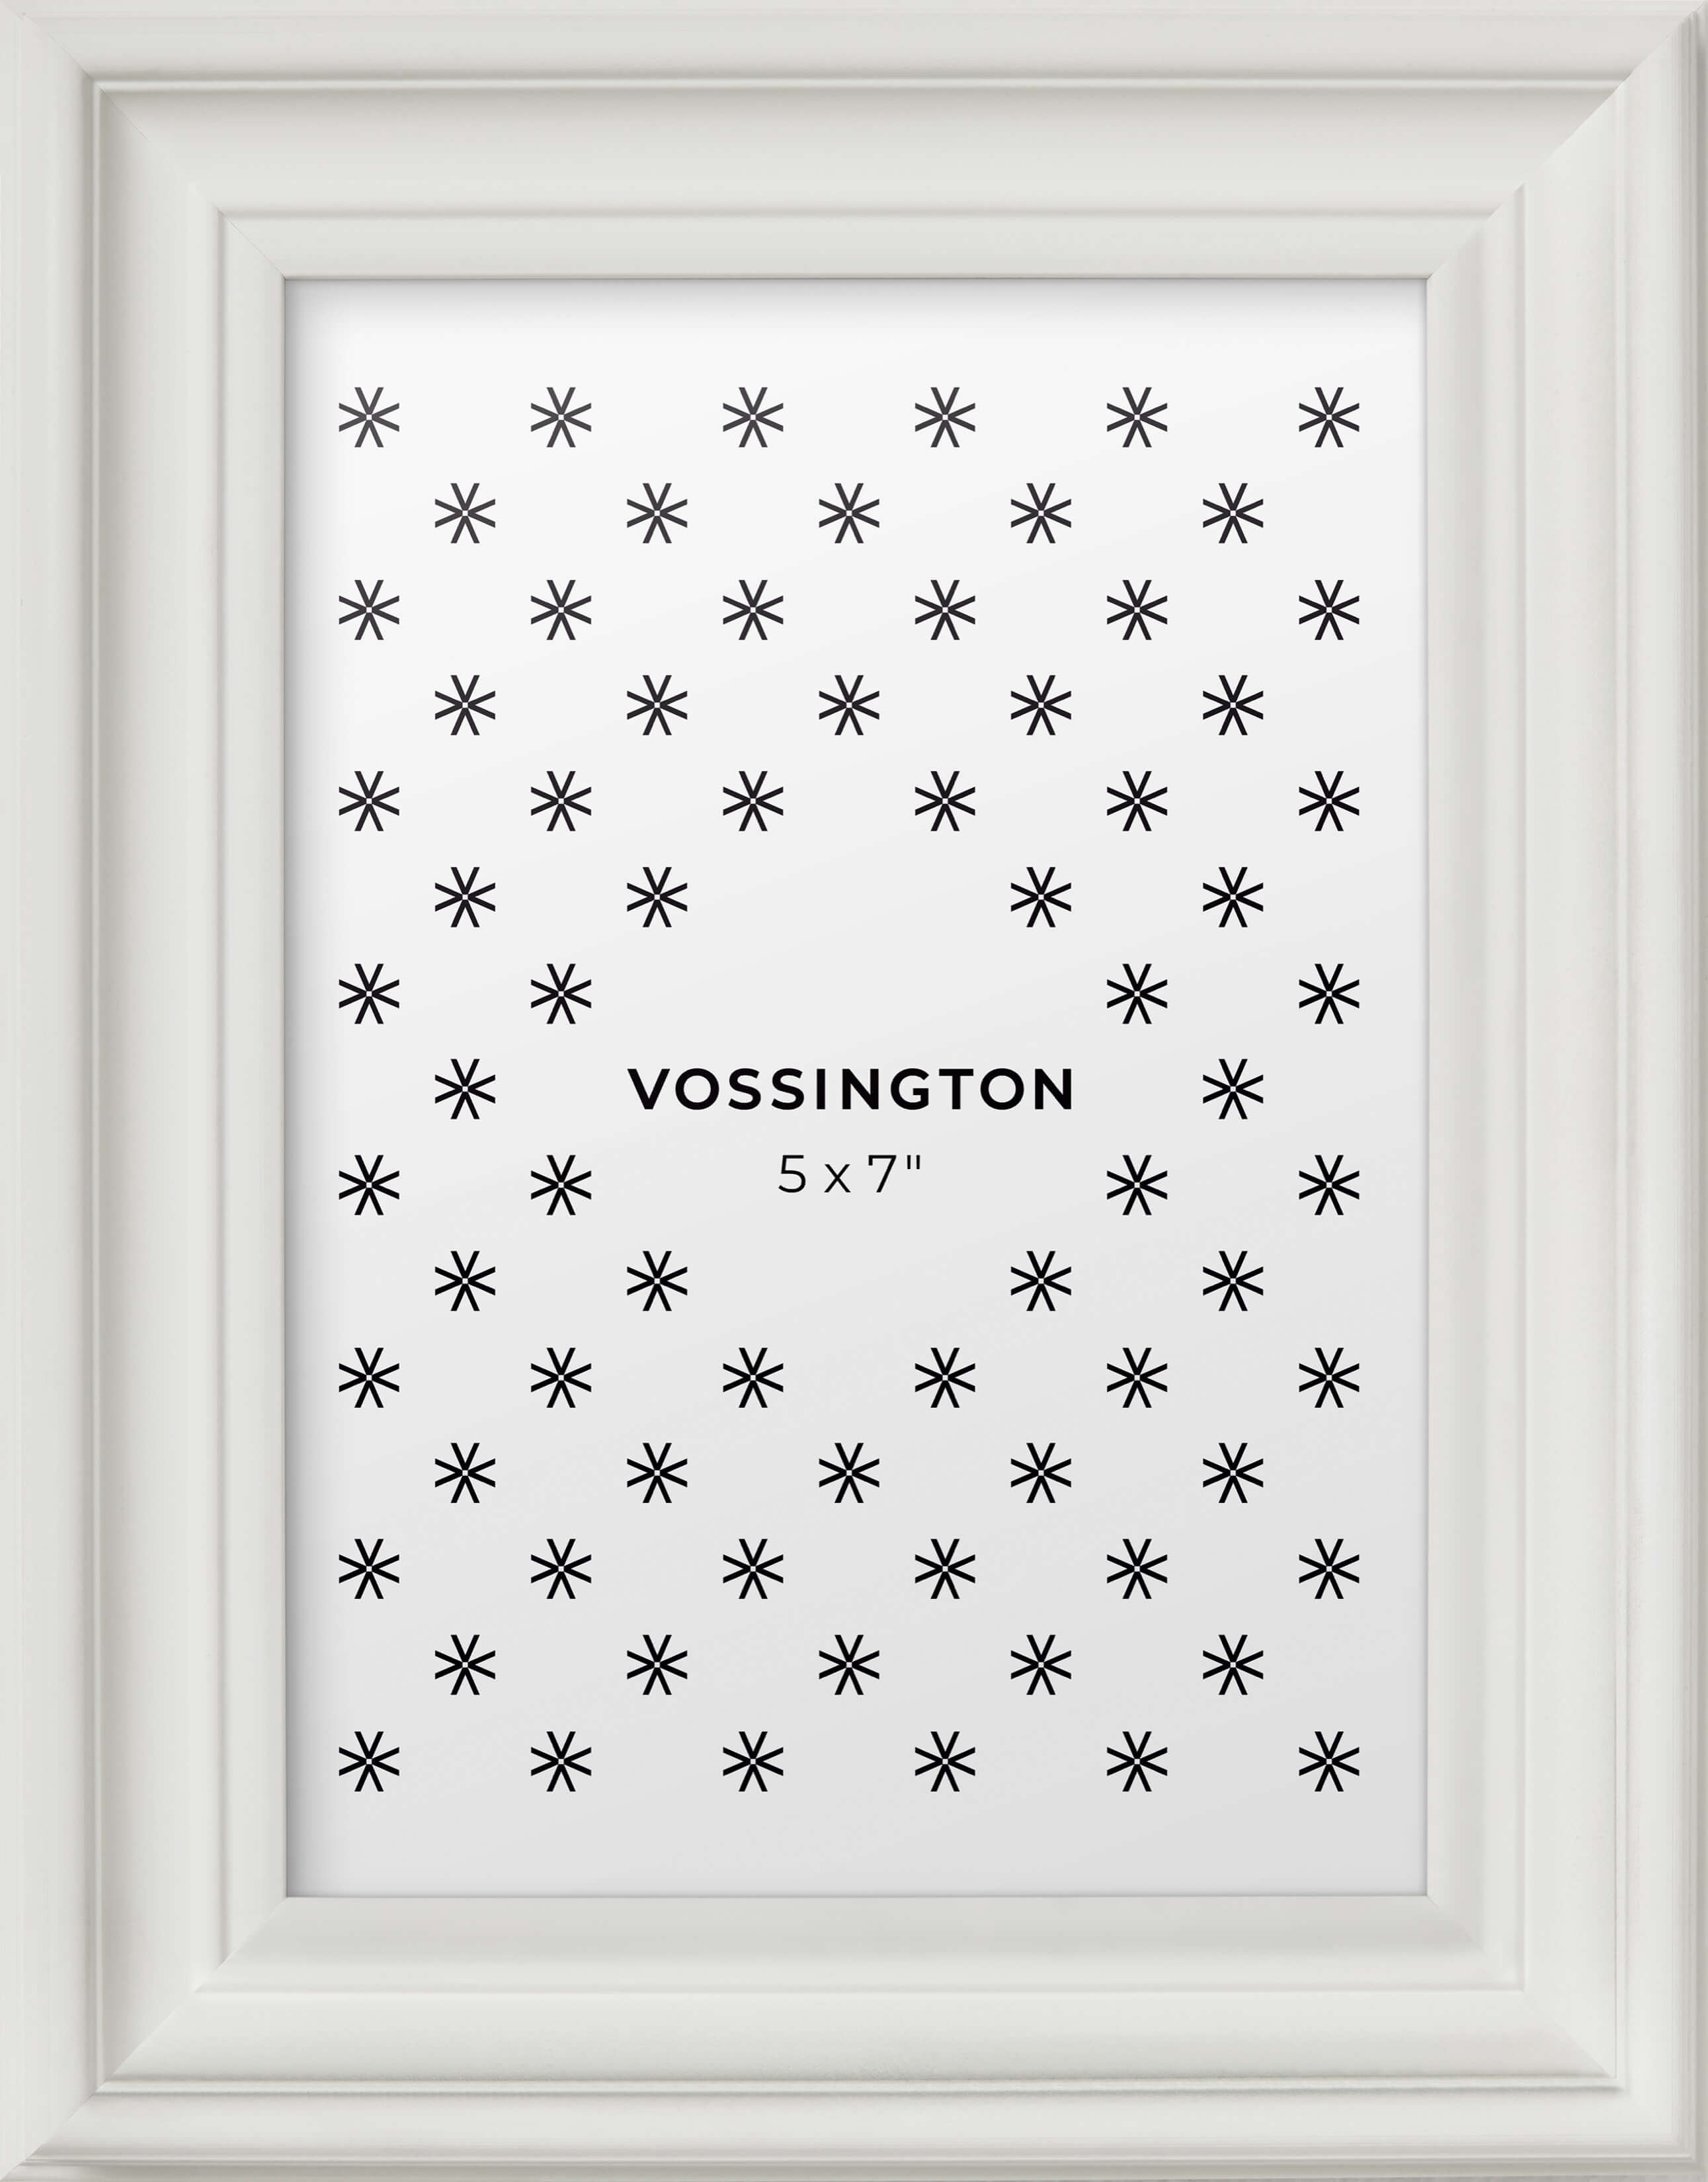 16x24 Rustic Frame, White - Well-Made & Sturdy - Vossington